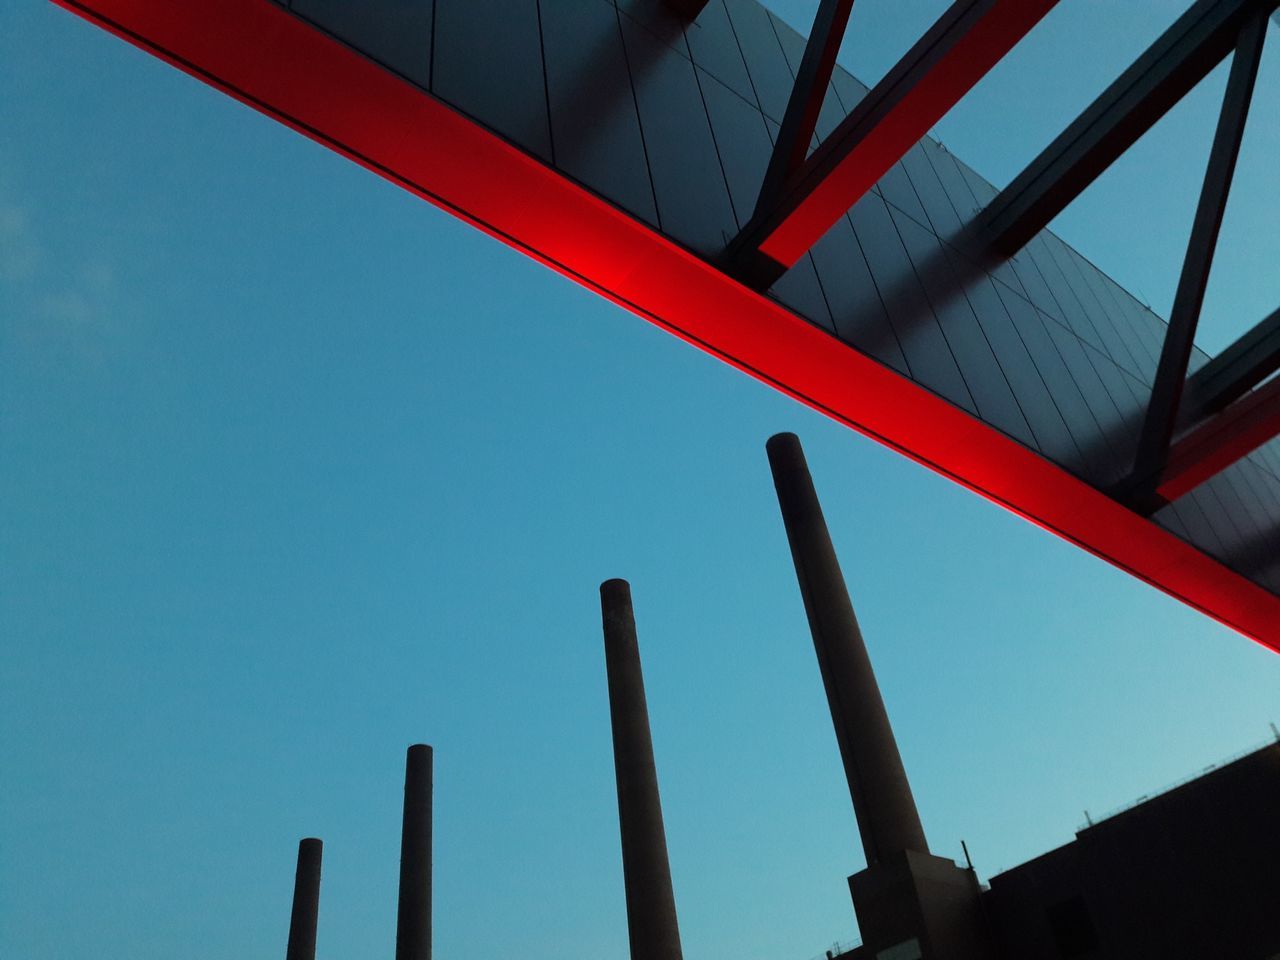 low angle view, sky, architecture, built structure, no people, clear sky, blue, nature, day, building exterior, red, metal, outdoors, tall - high, pattern, copy space, building, sunlight, close-up, roof, girder, directly below